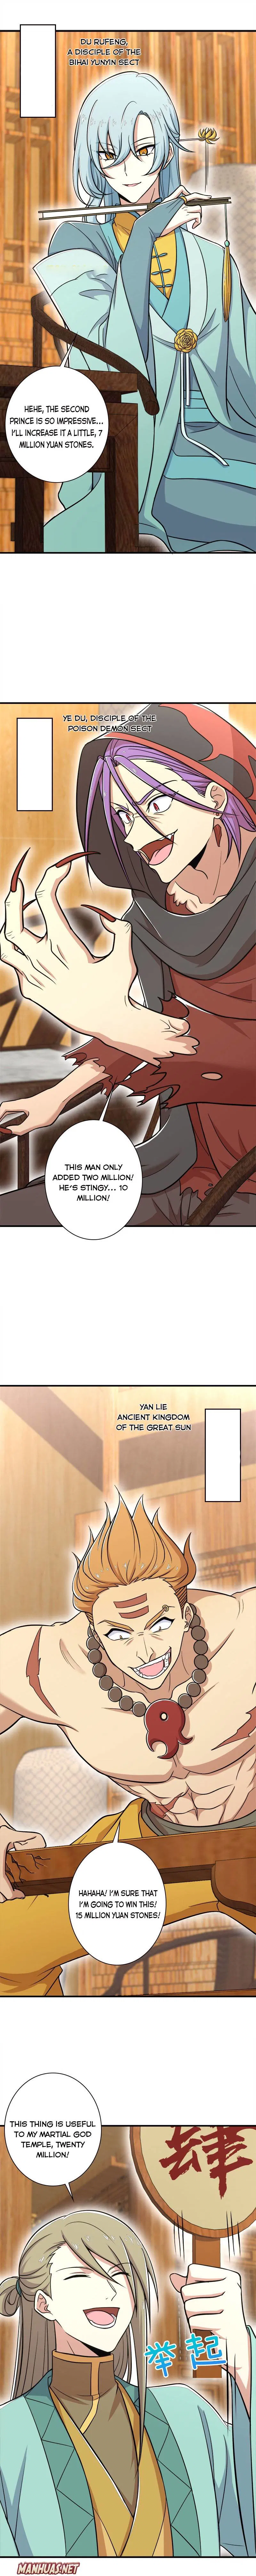 Life of a War Emperor After Retirement Chapter 17 page 3